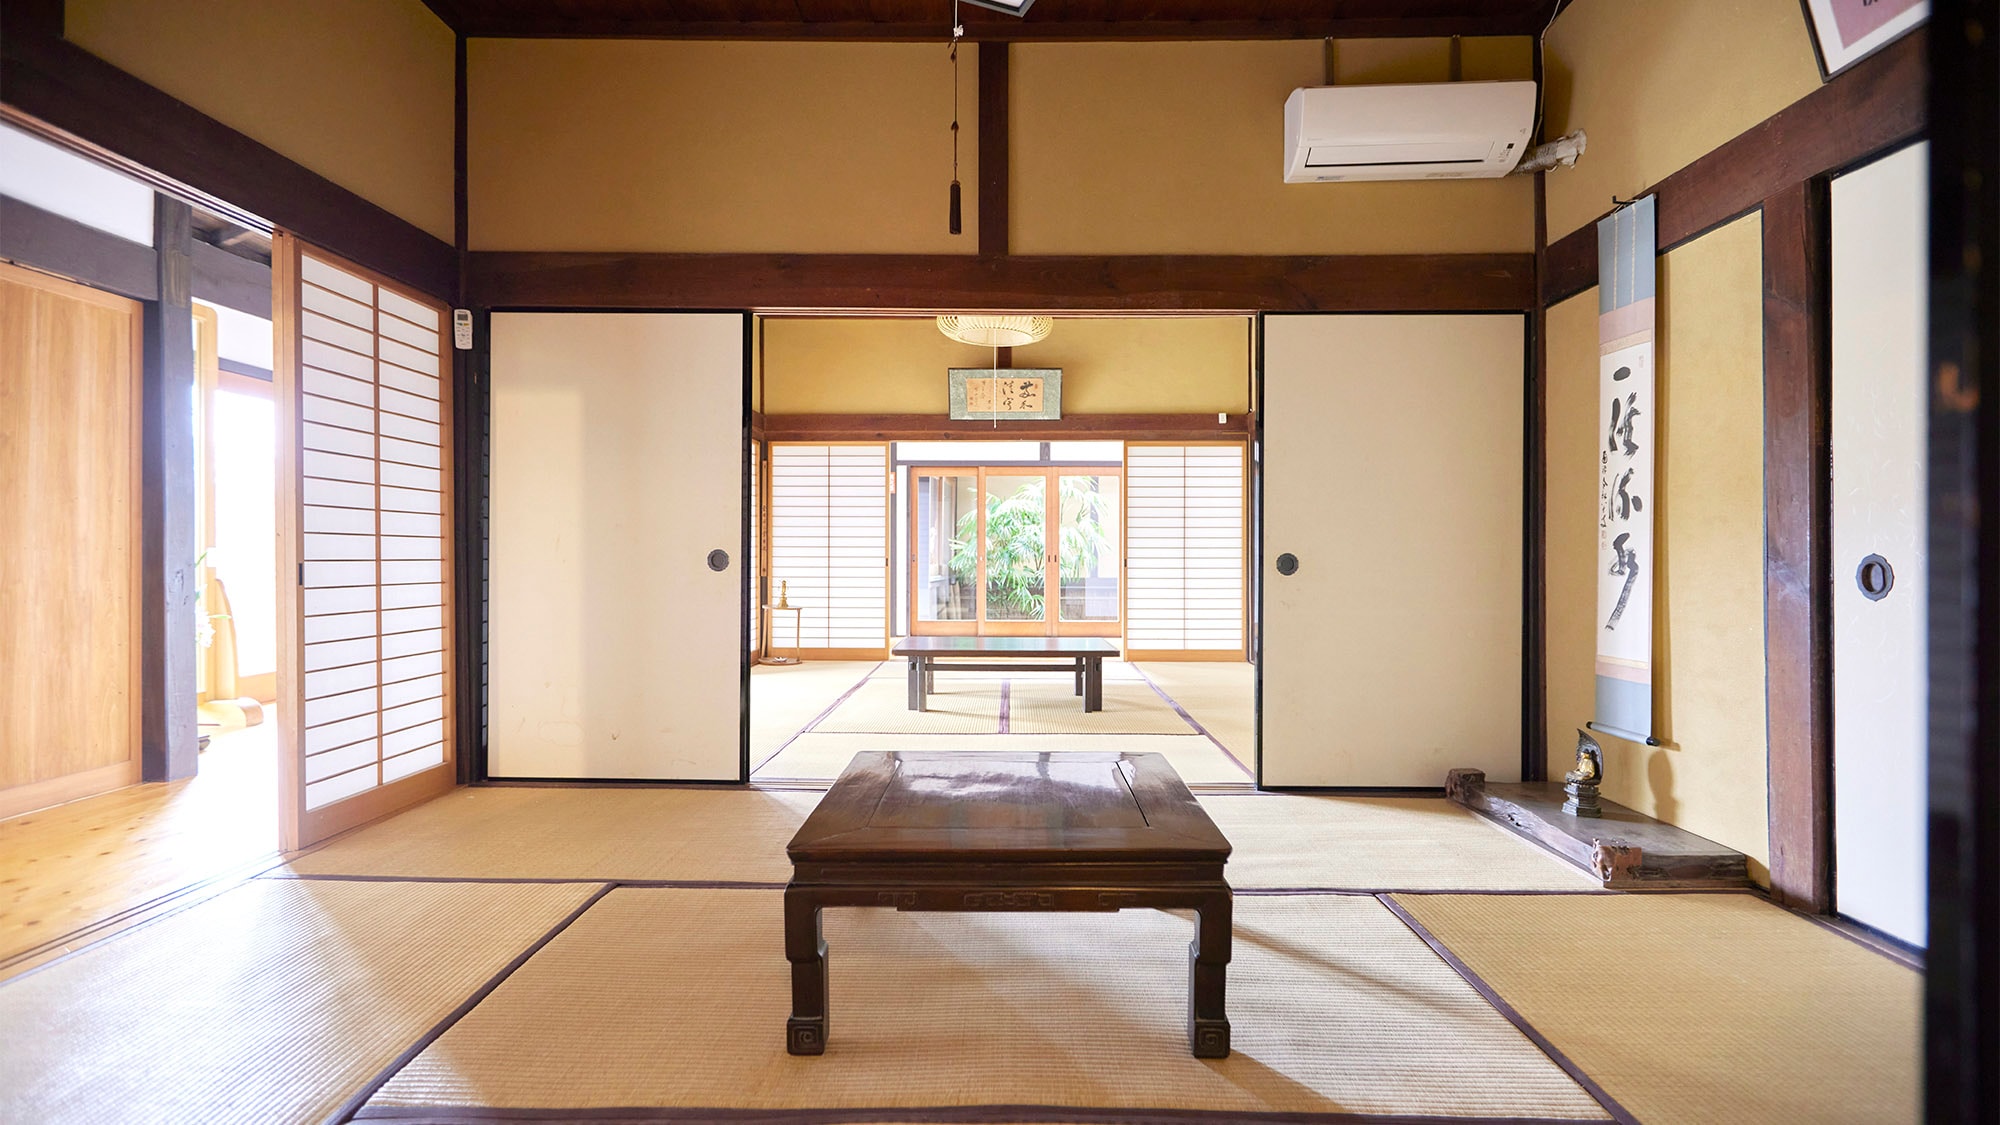 ・ A Japanese-style room where you can have a pleasant morning at the shukubo